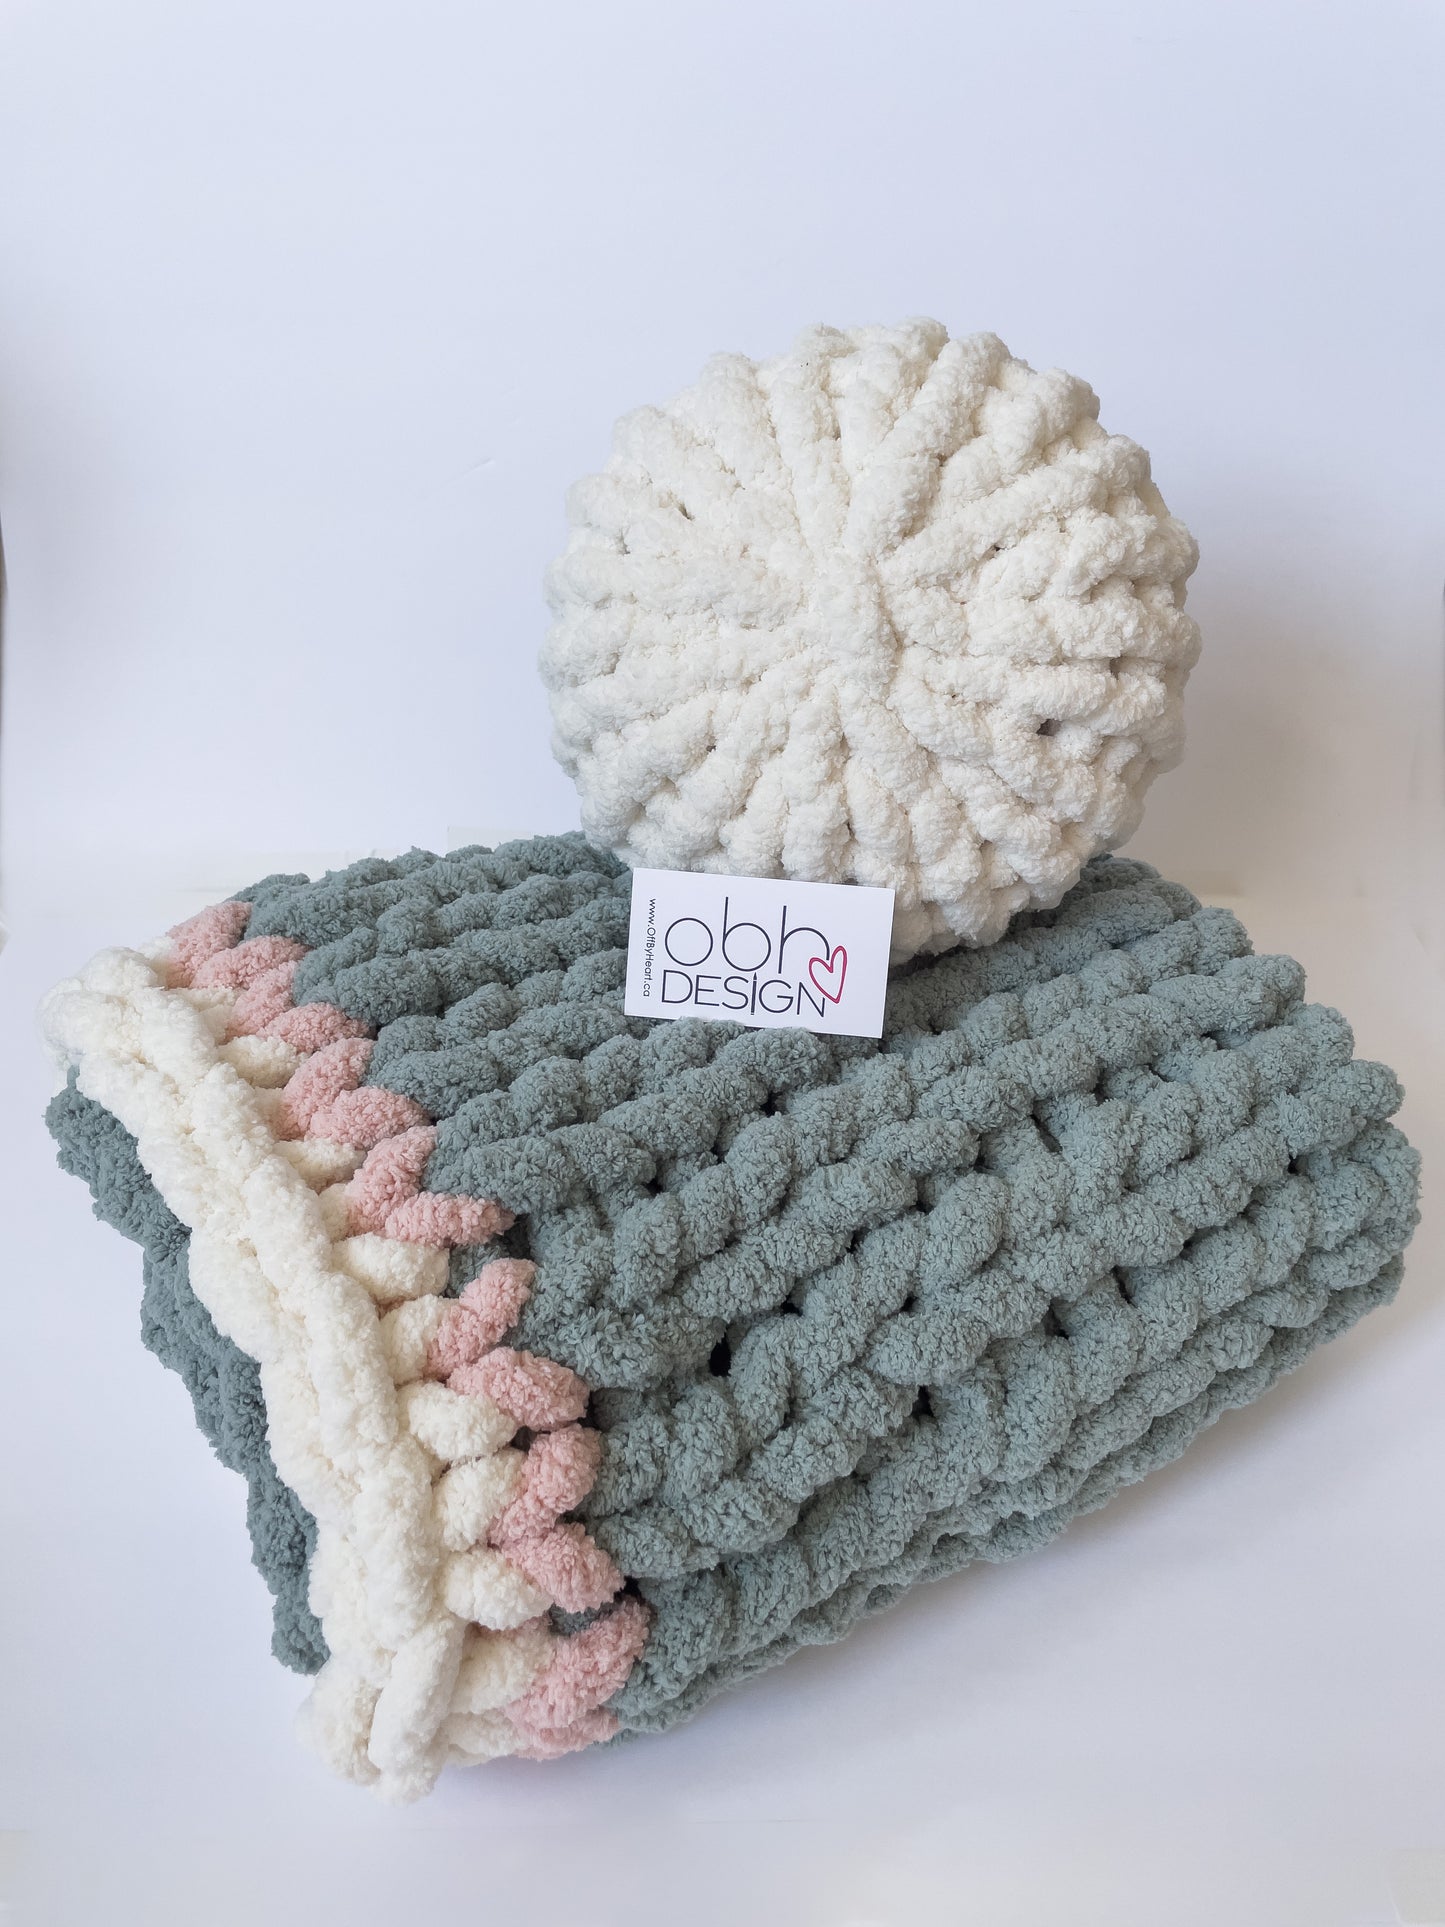 Healing Hand, Chunky Knit Baby Blankets - Mint Green with White Pillow Set